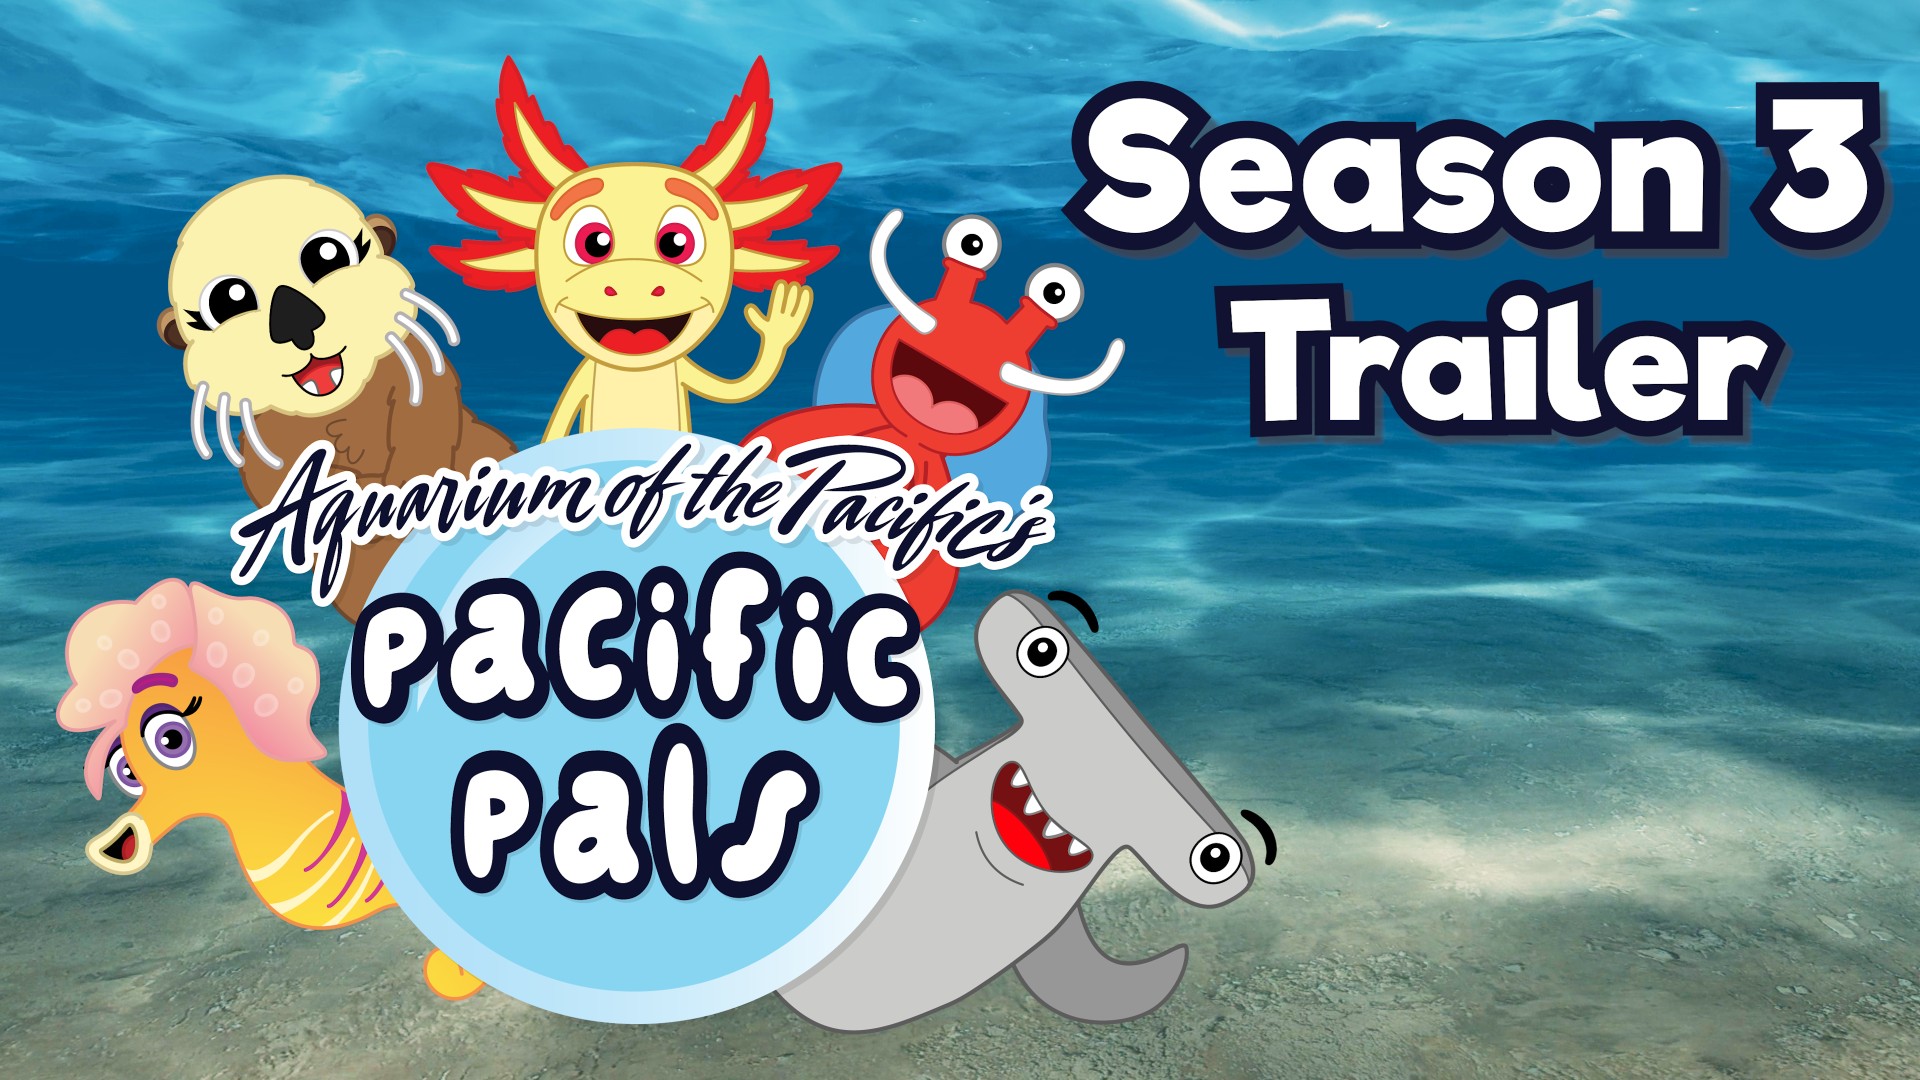 Third Season of ‘The Pacific Pals Show!’ Released by Aquarium of the Pacific